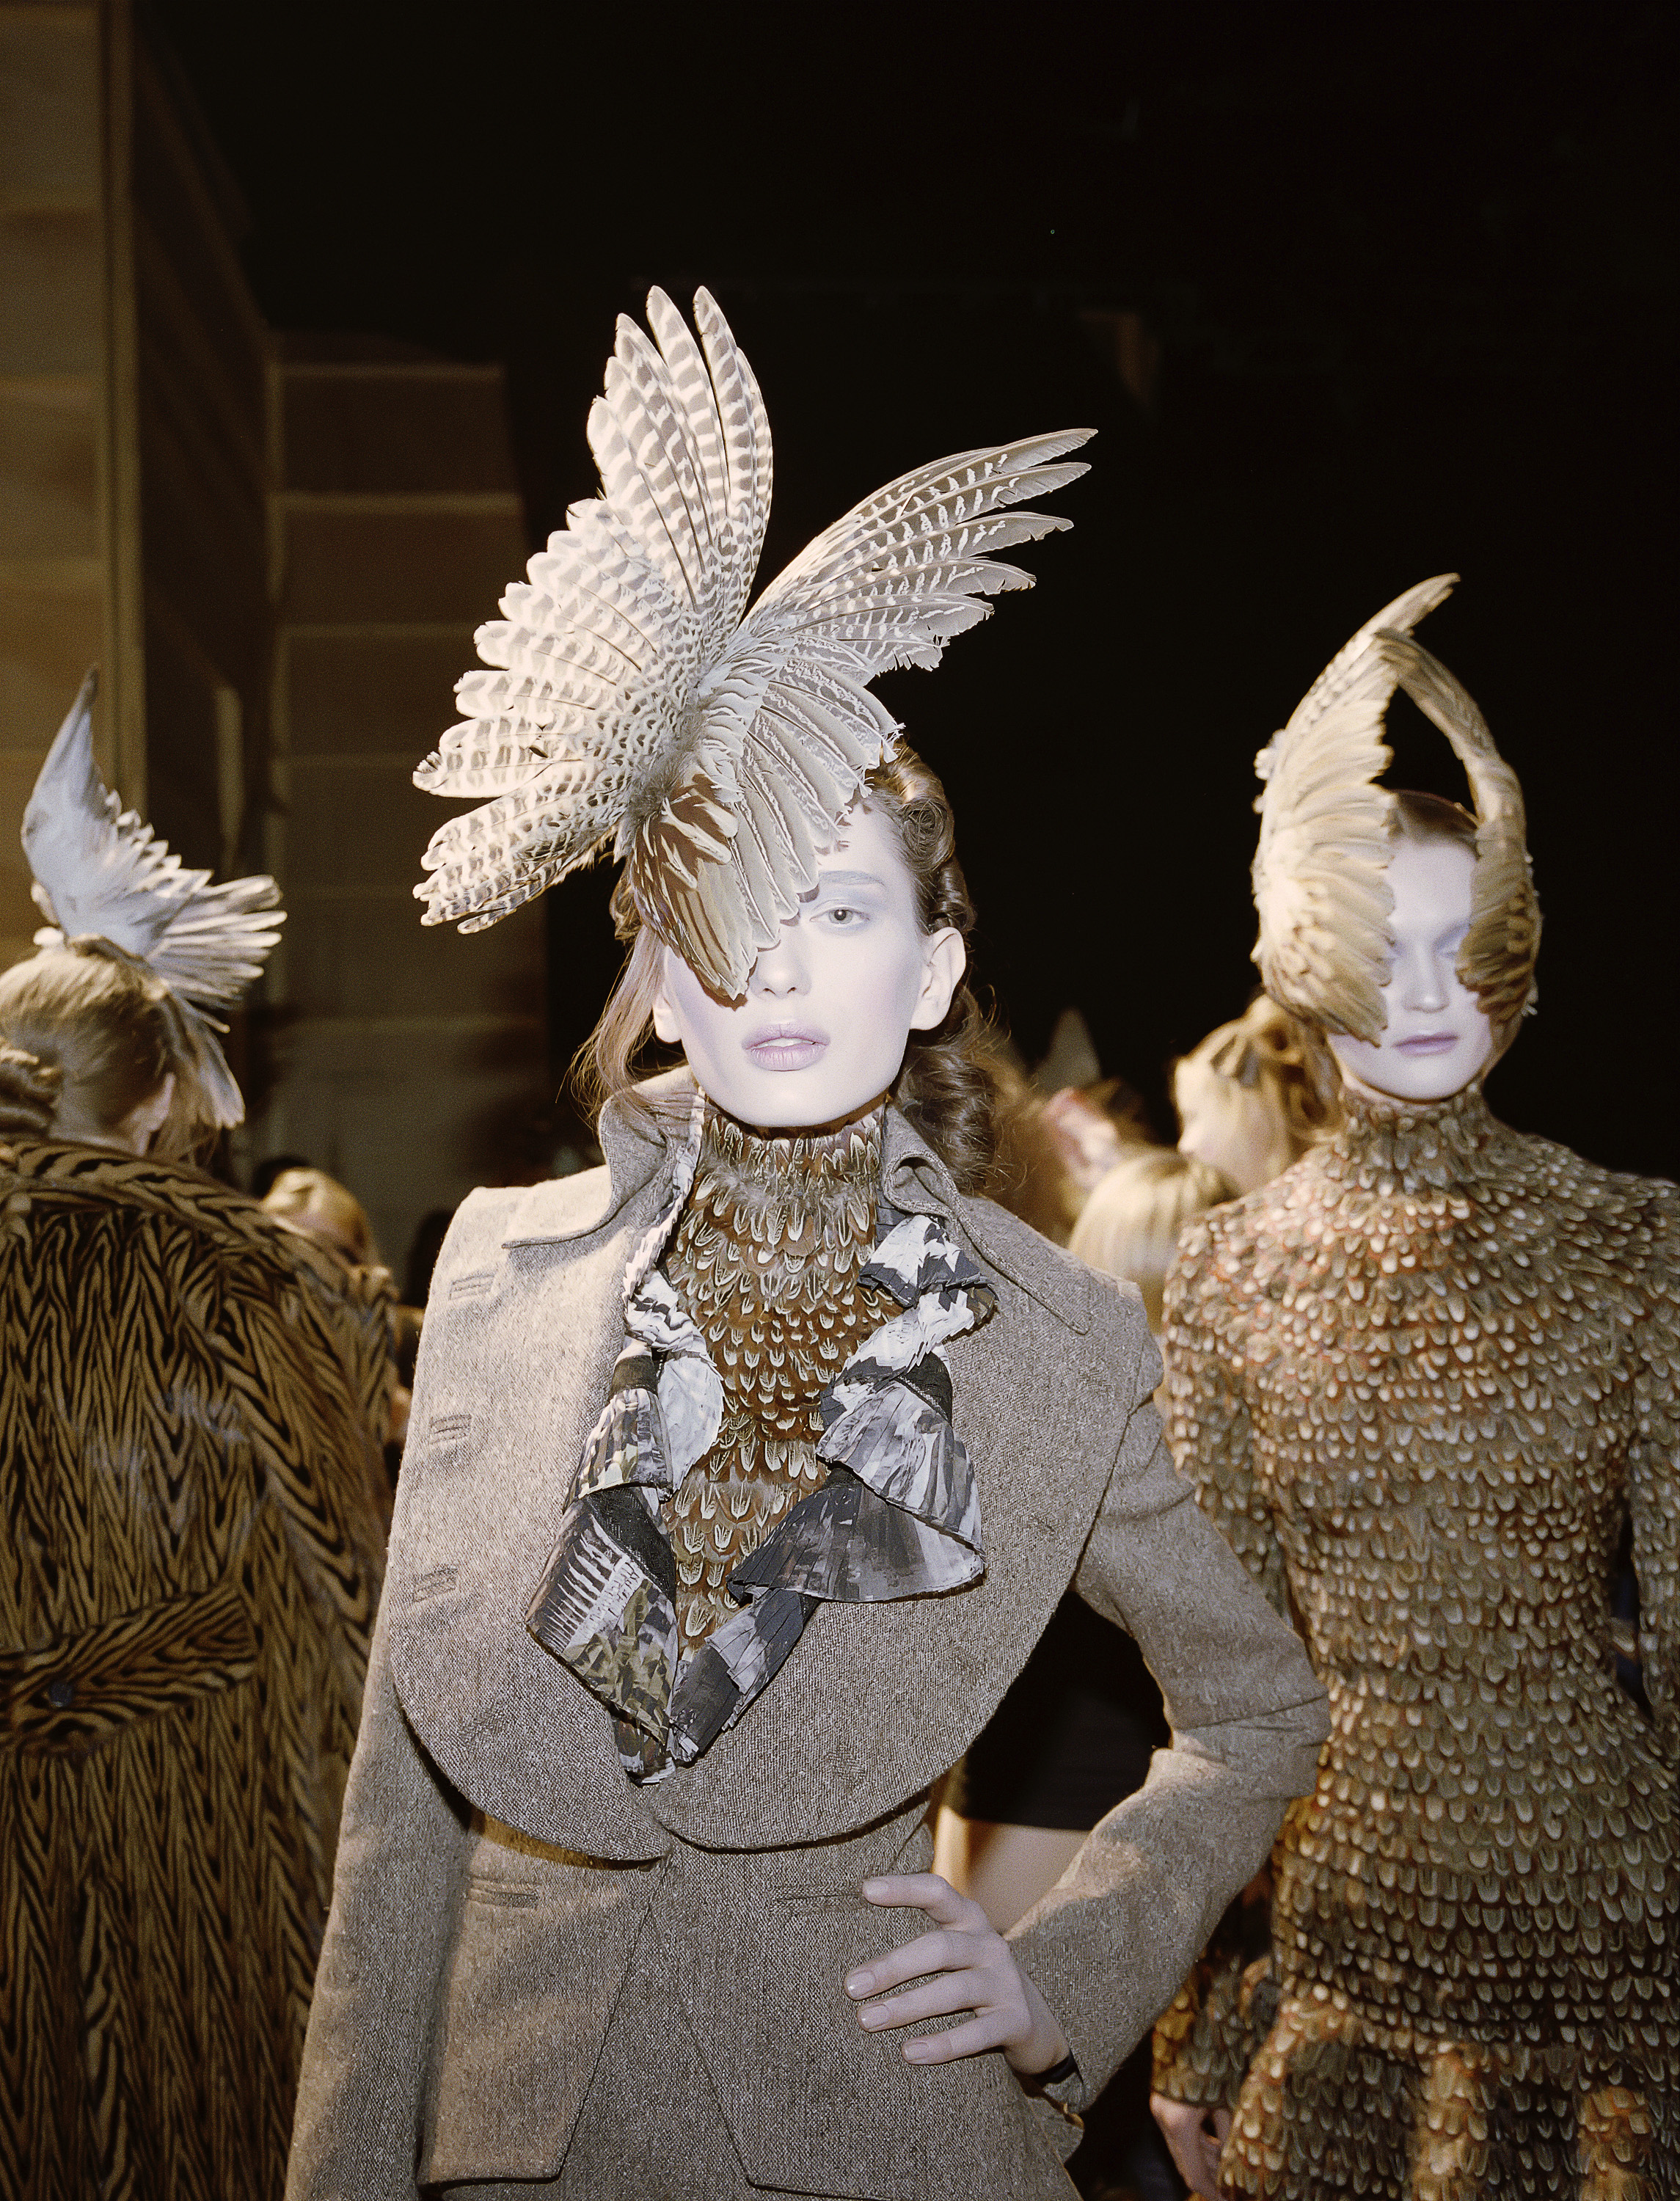 A model poses with a hand on her hip, wearing a feather headpiece and a unique blazer, her face powdered white